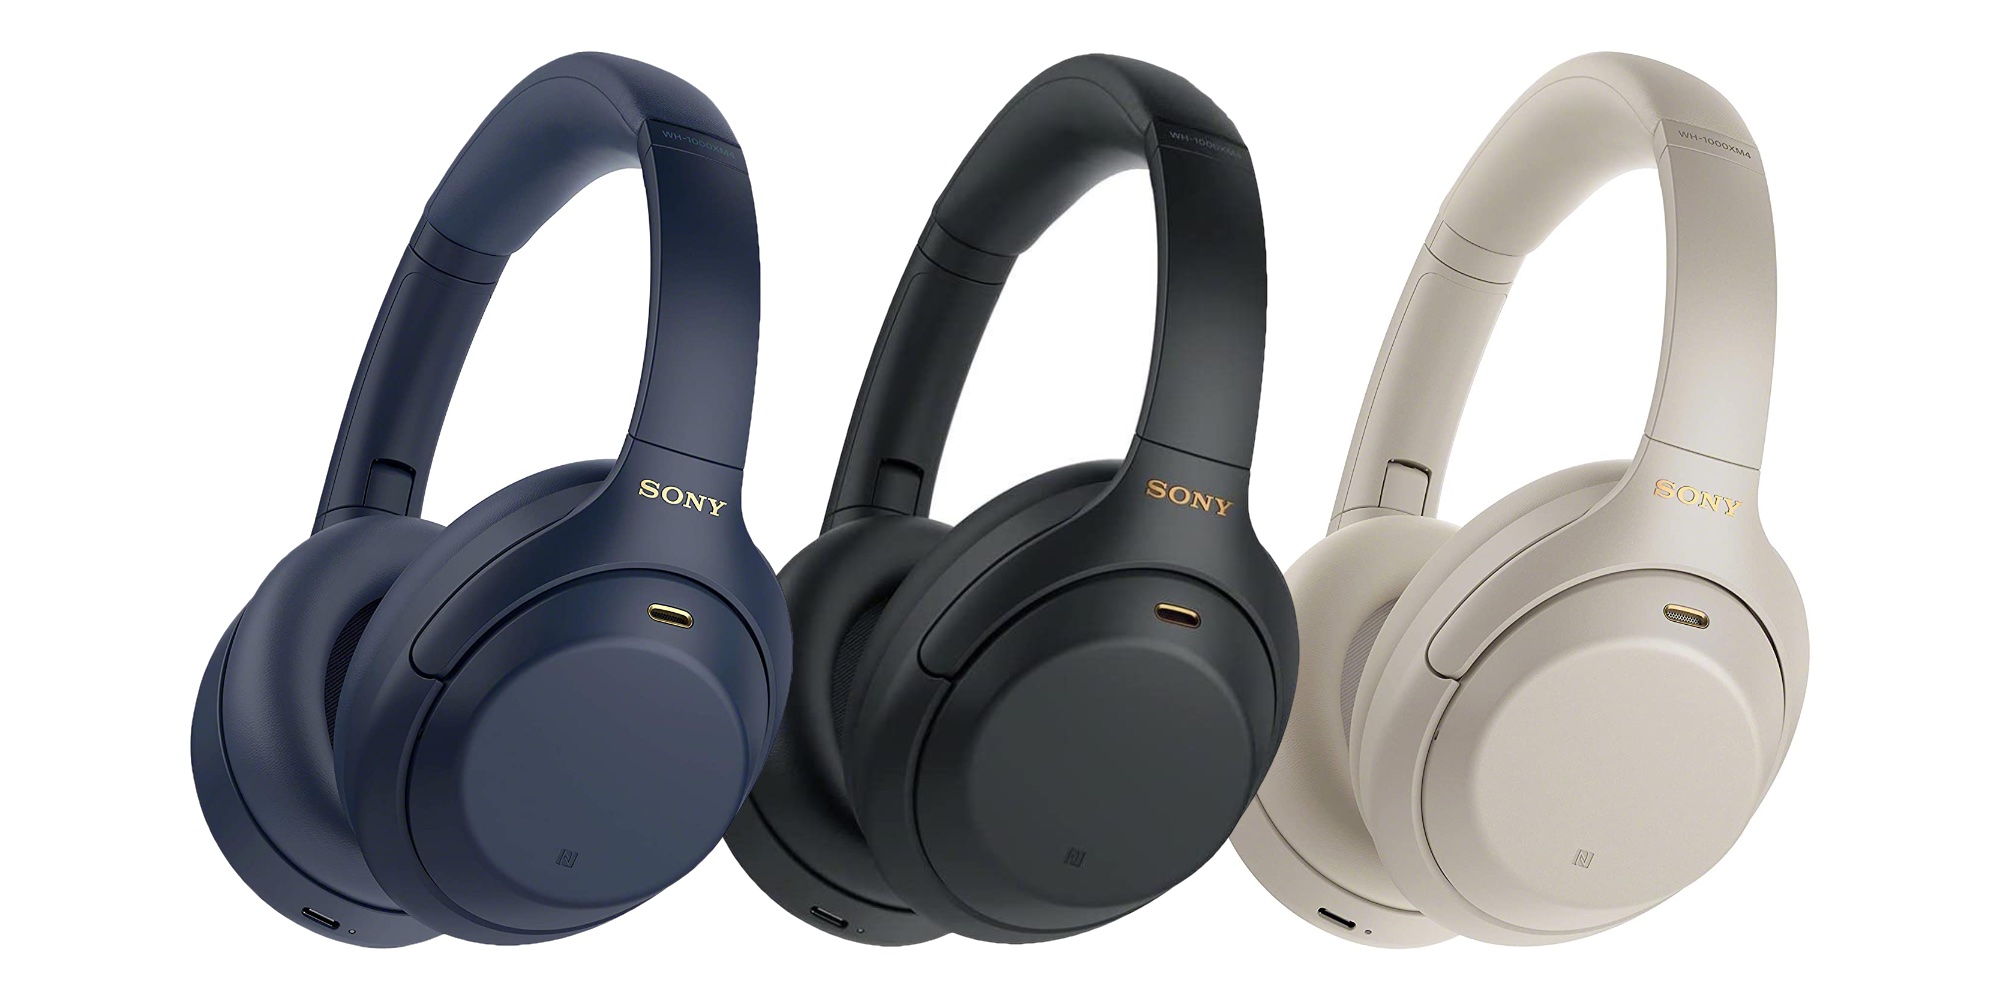 Sony WH-1000XM4 drops back down to lowest price ever for Cyber Monday